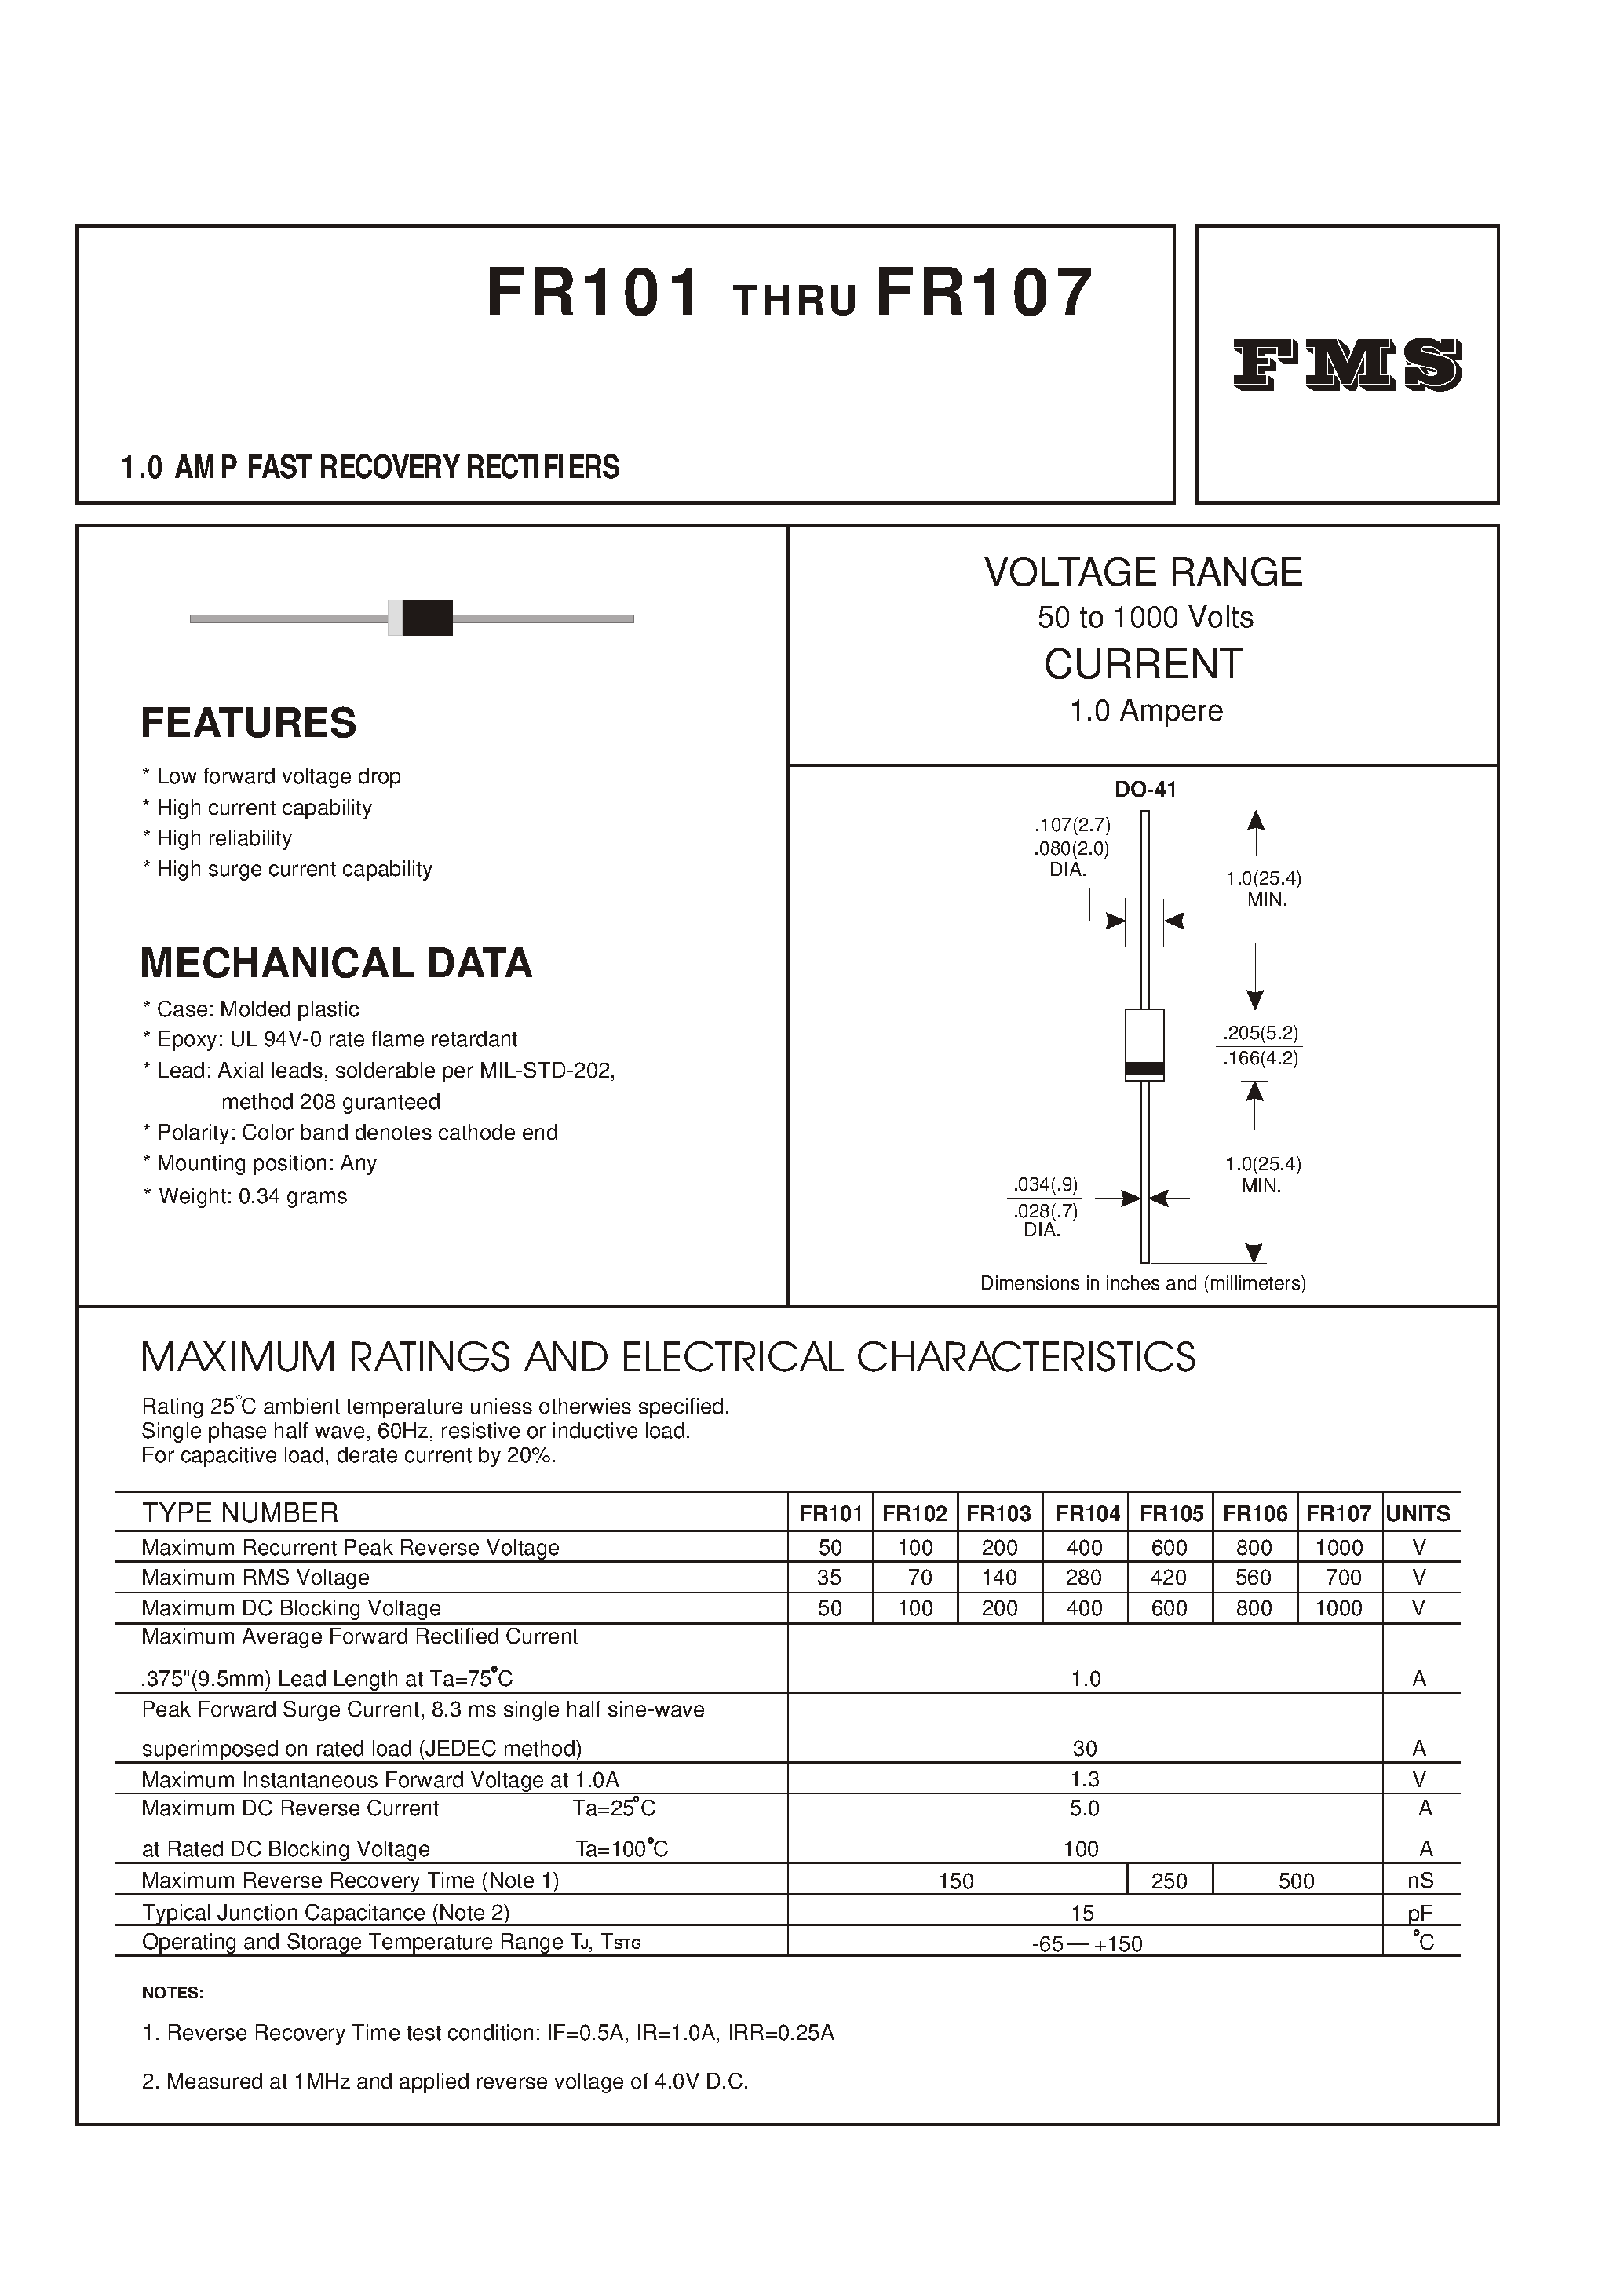 Datasheet FR101 - 1.0 AMP FAST RECOVERY RECTIFIERS page 1